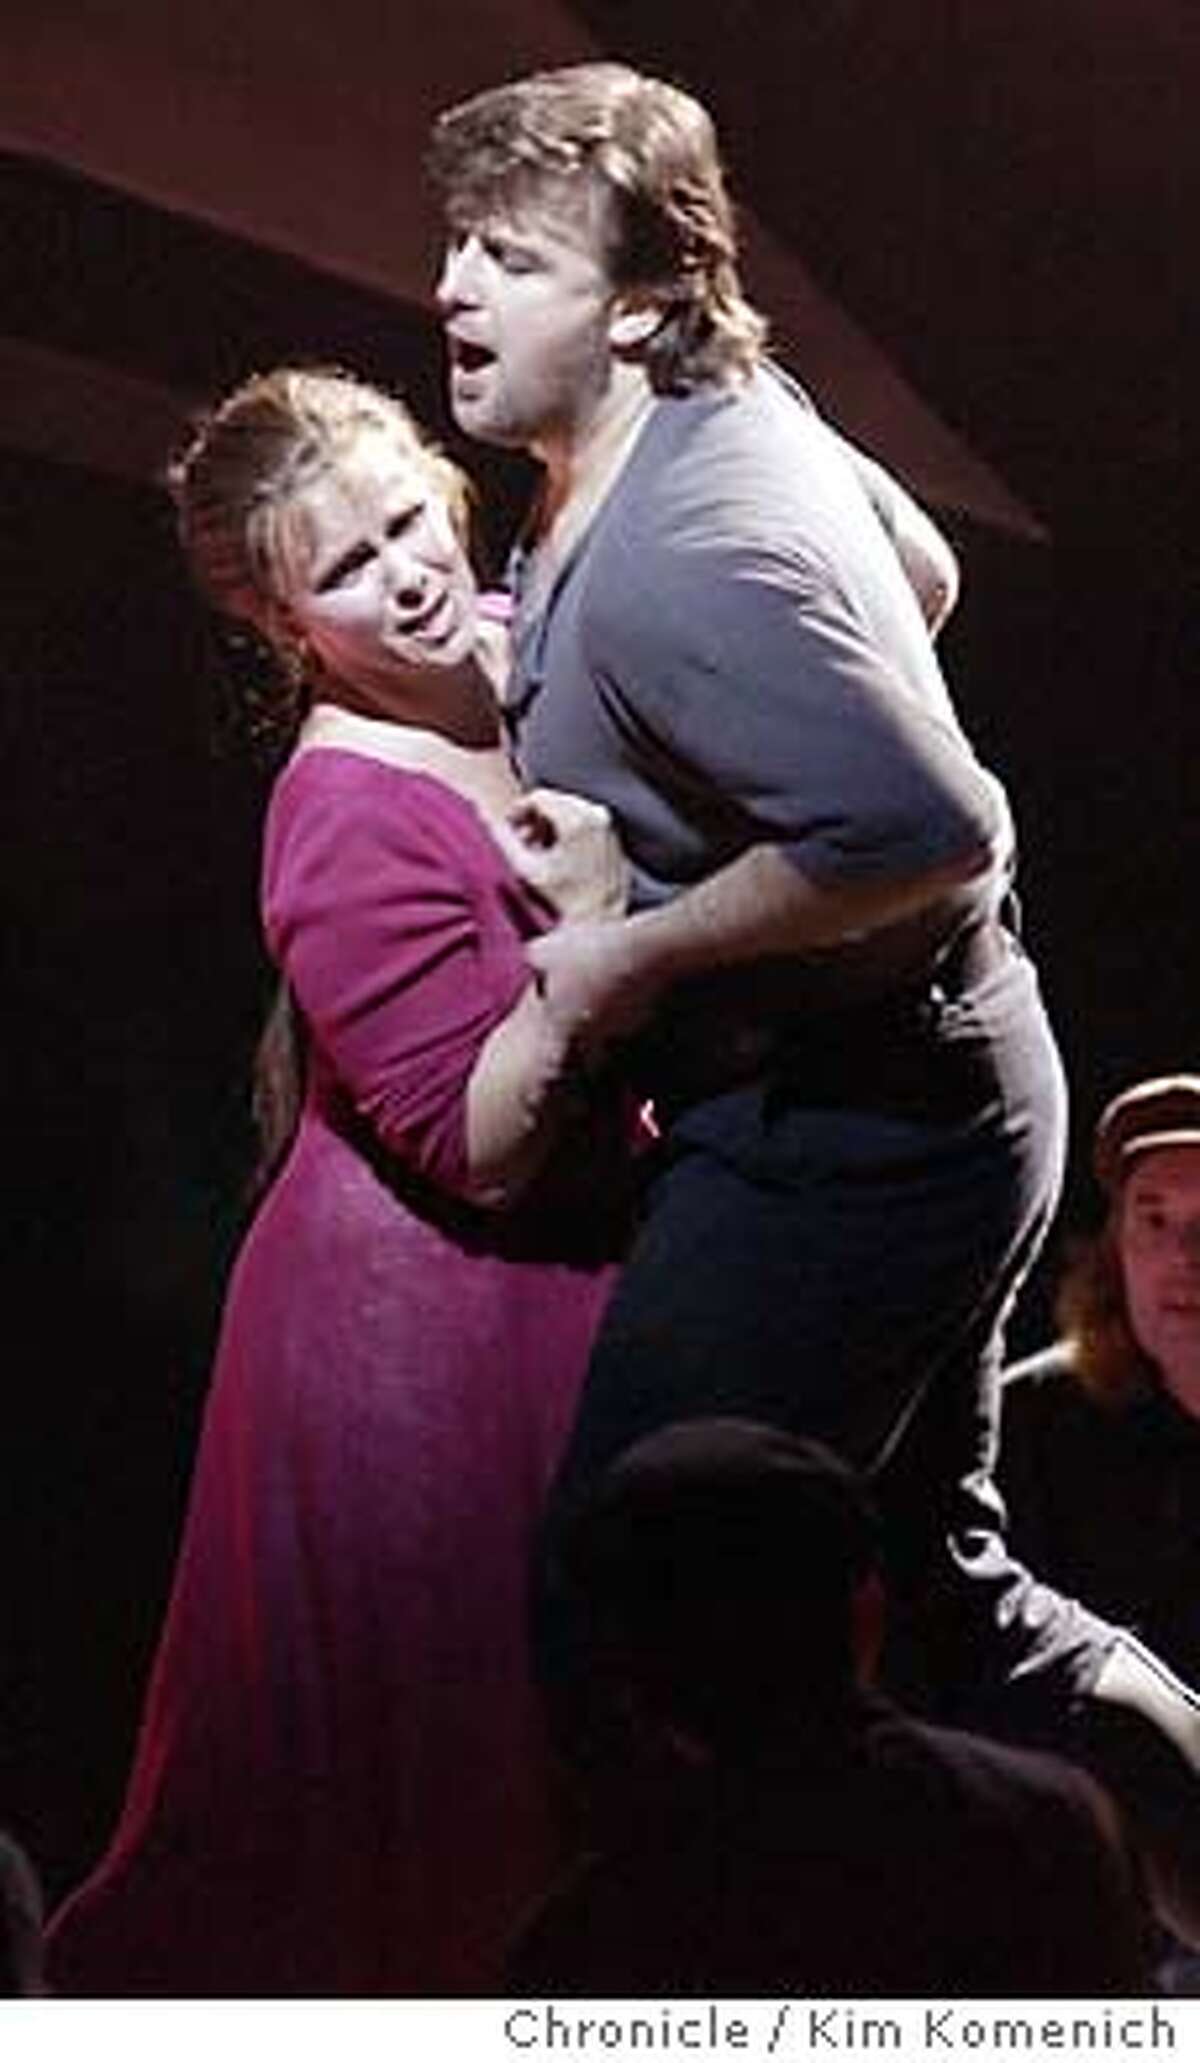 11/6/03 in San Francisco. San Francisco Opera presents Lady Macbeth of Mtsensk. Katerina (Solveig Kringelborn) accepts a challenge from Sergei (Christopher Ventris) to prove her strength. KIM KOMENICH / The Chronicle